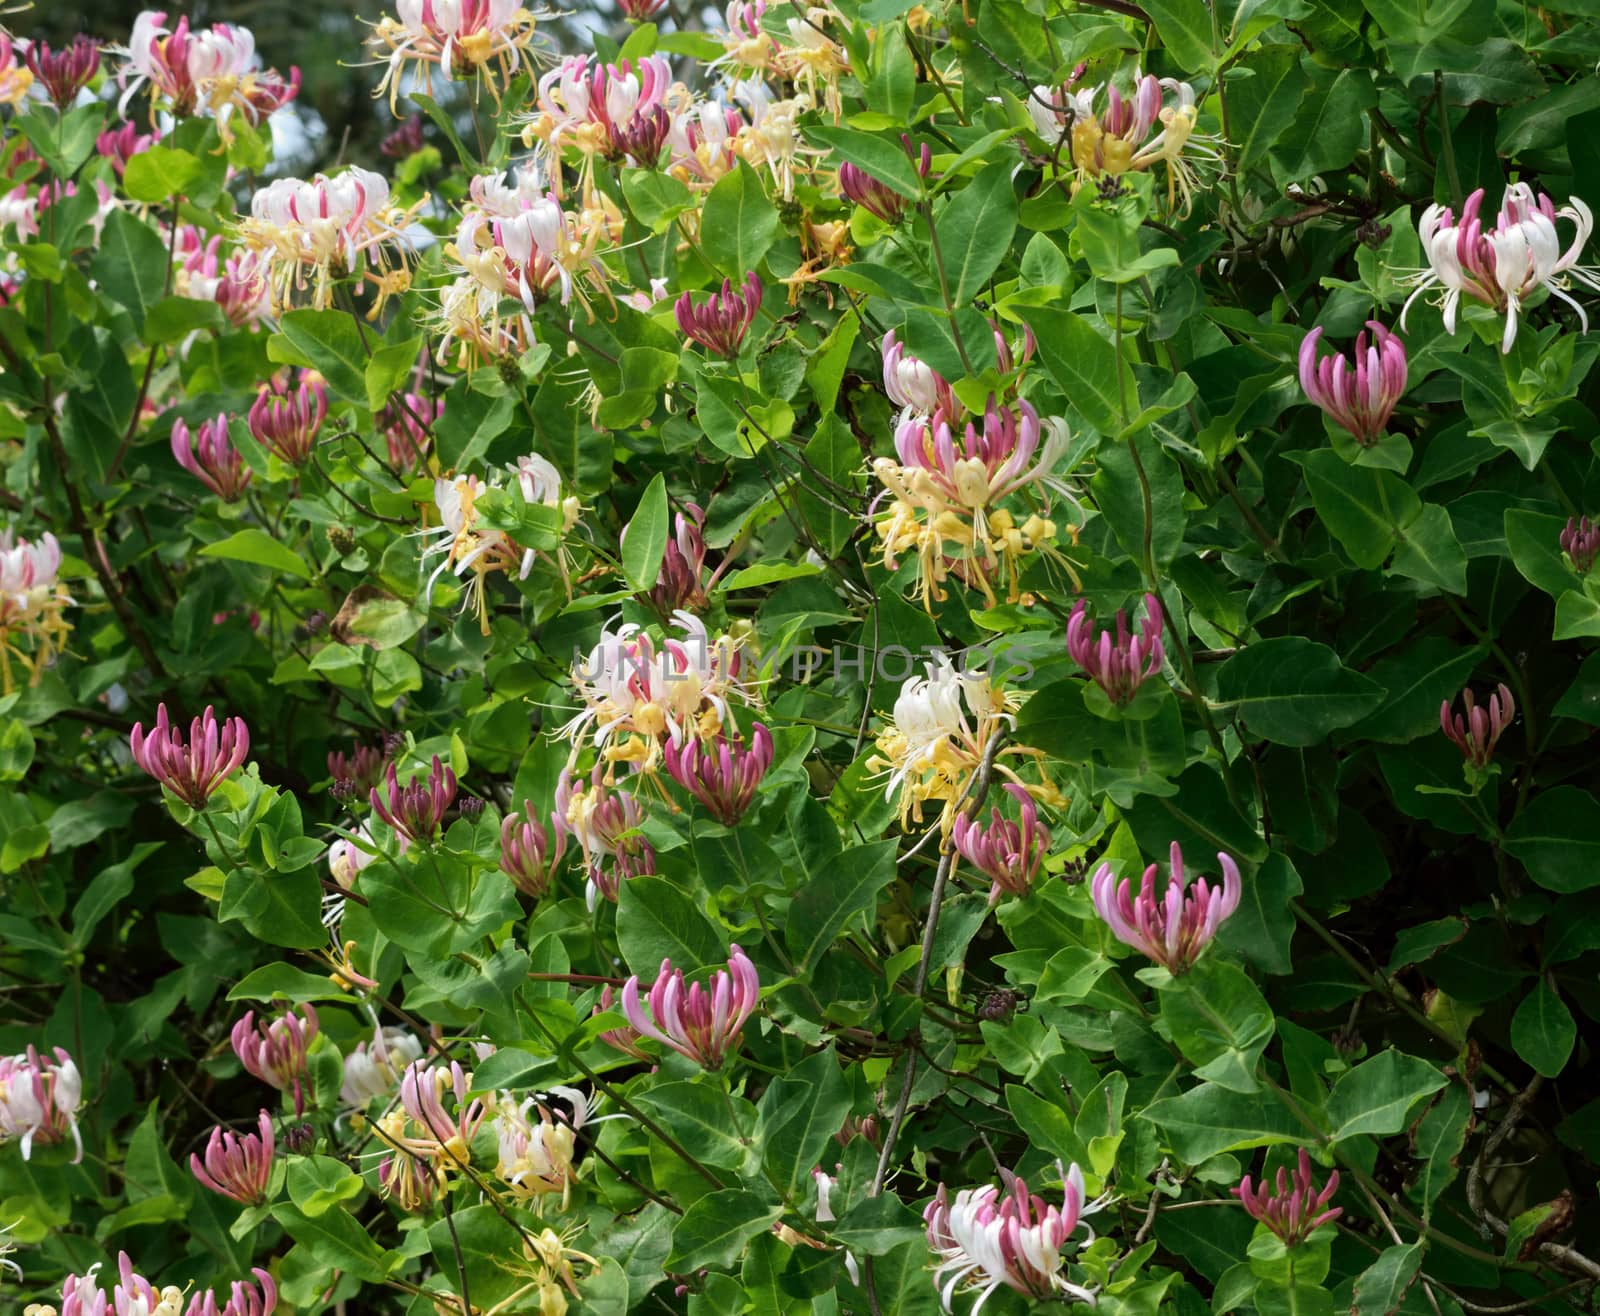 Honeysuckle.

Beautiful, delicate yet robust, this summer flowering climber has the most delicate aroma.